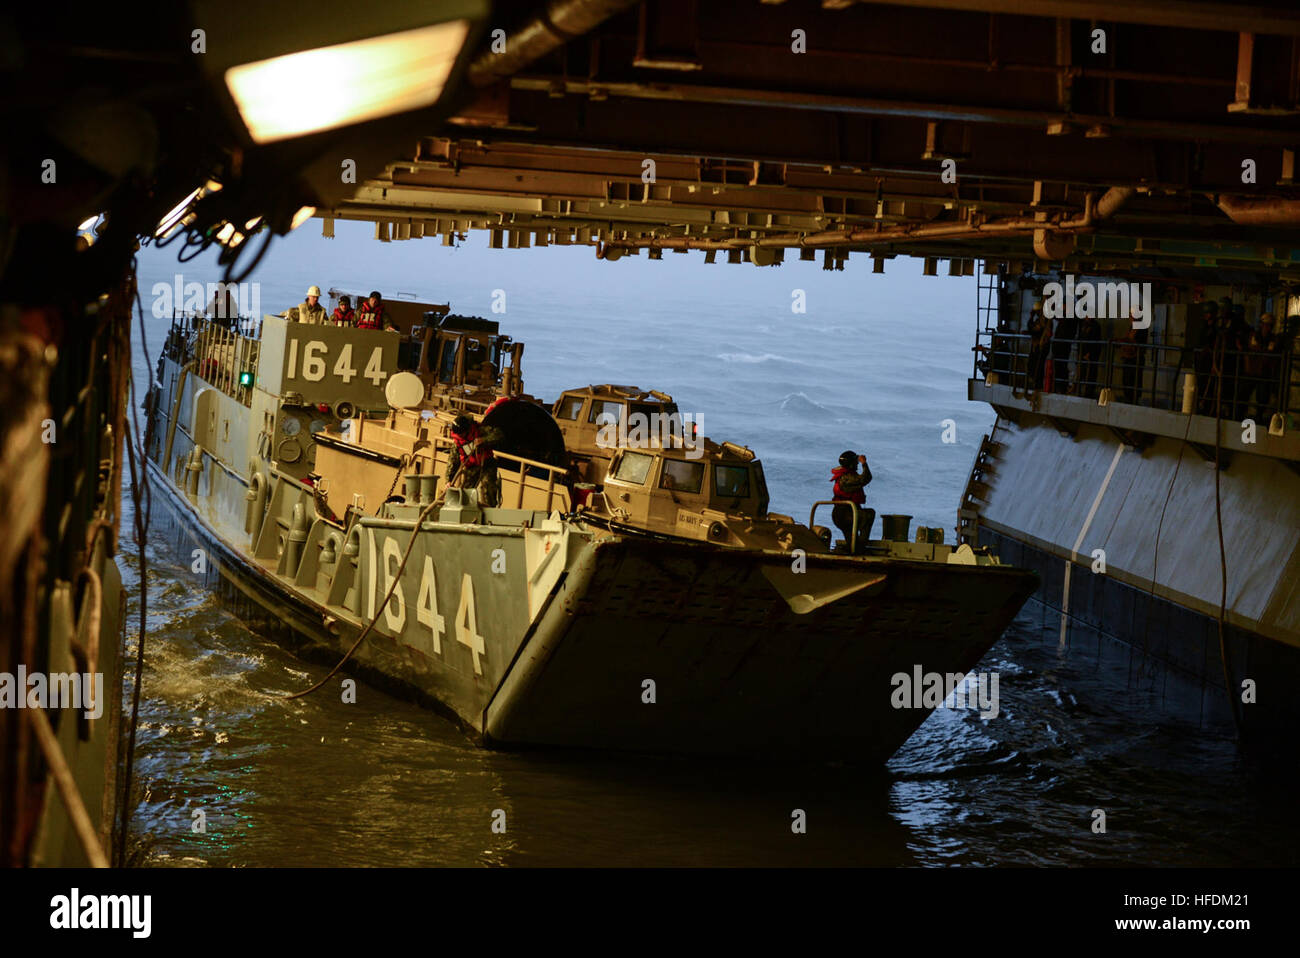 NORFOLK (Oct. 8, 2016) Landing Craft Utility (LCU) 1644, attached to Assault Craft Unit (ACU) 2, enters the well deck of the amphibious assault ship USS Iwo Jima (LHD 7). Iwo Jima and the 24th Marine Expeditionary Unit (24th MEU) are preparing to provide disaster relief and humanitarian aid to Haiti following Hurricane Matthew. (U.S. Navy photo by Seaman Daniel C. Coxwest/Released) 161008-N-AH771-177 Join the conversation: www.navy.mil/viewGallery.asp www.facebook.com/USNavy www.twitter.com/USNavy navylive.dodlive.mil pinterest.com plus.google.com An LCU enters the well deck of the amphibious  Stock Photo